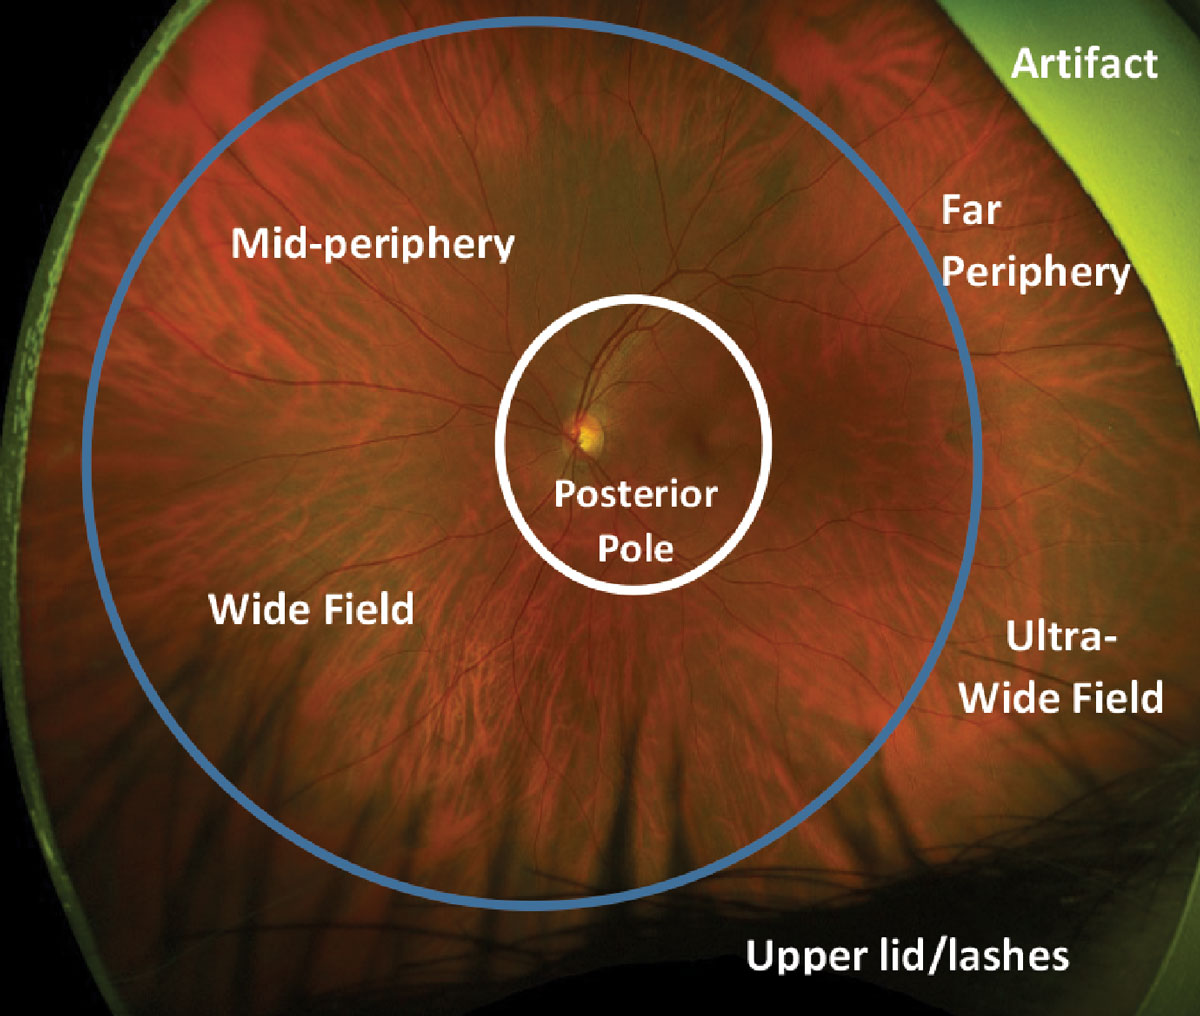 Fig. 2. Defining widefield and ultra-widefield on an Optos photo. The white circle represents the posterior pole of the fundus. The retina inside the blue circle represents widefield imaging and mid peripheral retina. The retina outside the blue circle represents ultra-widefield imaging and the far periphery.